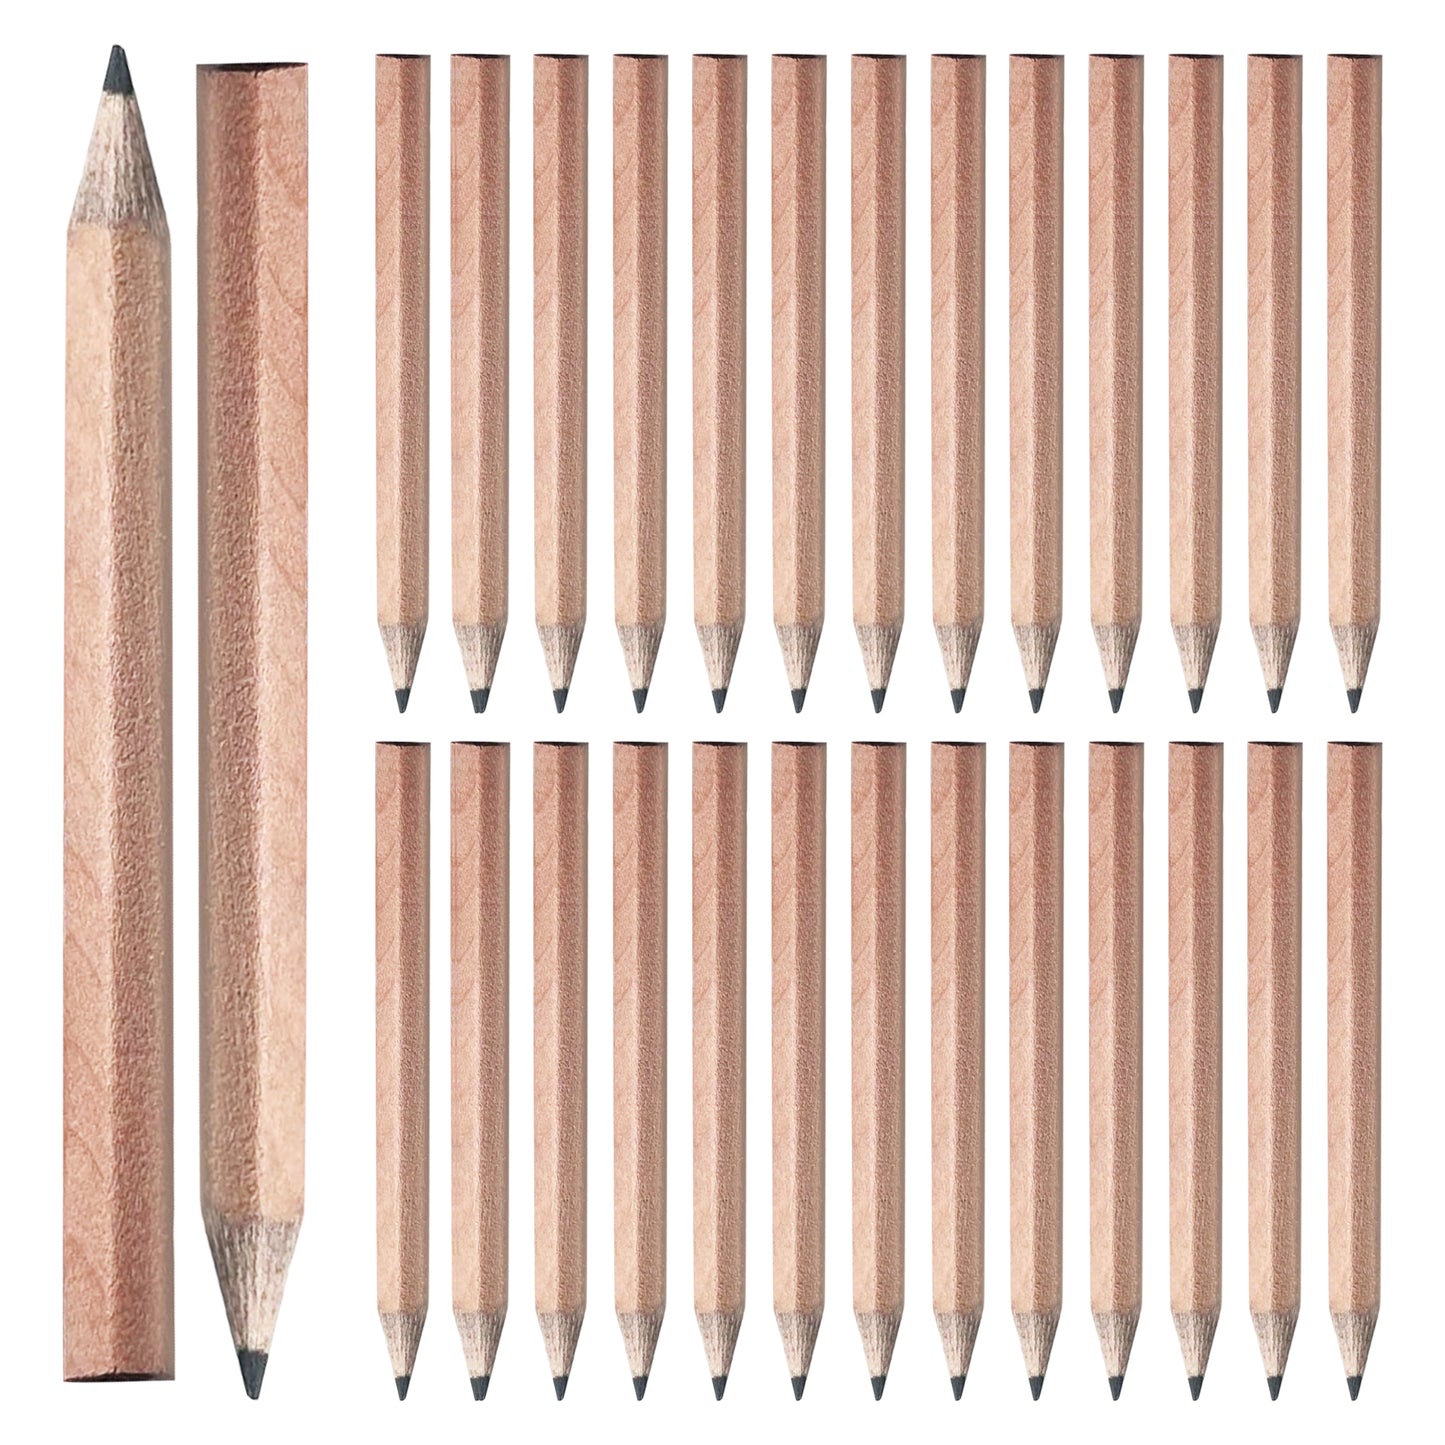 Pack of 144 Half Size Pencils by Janrax